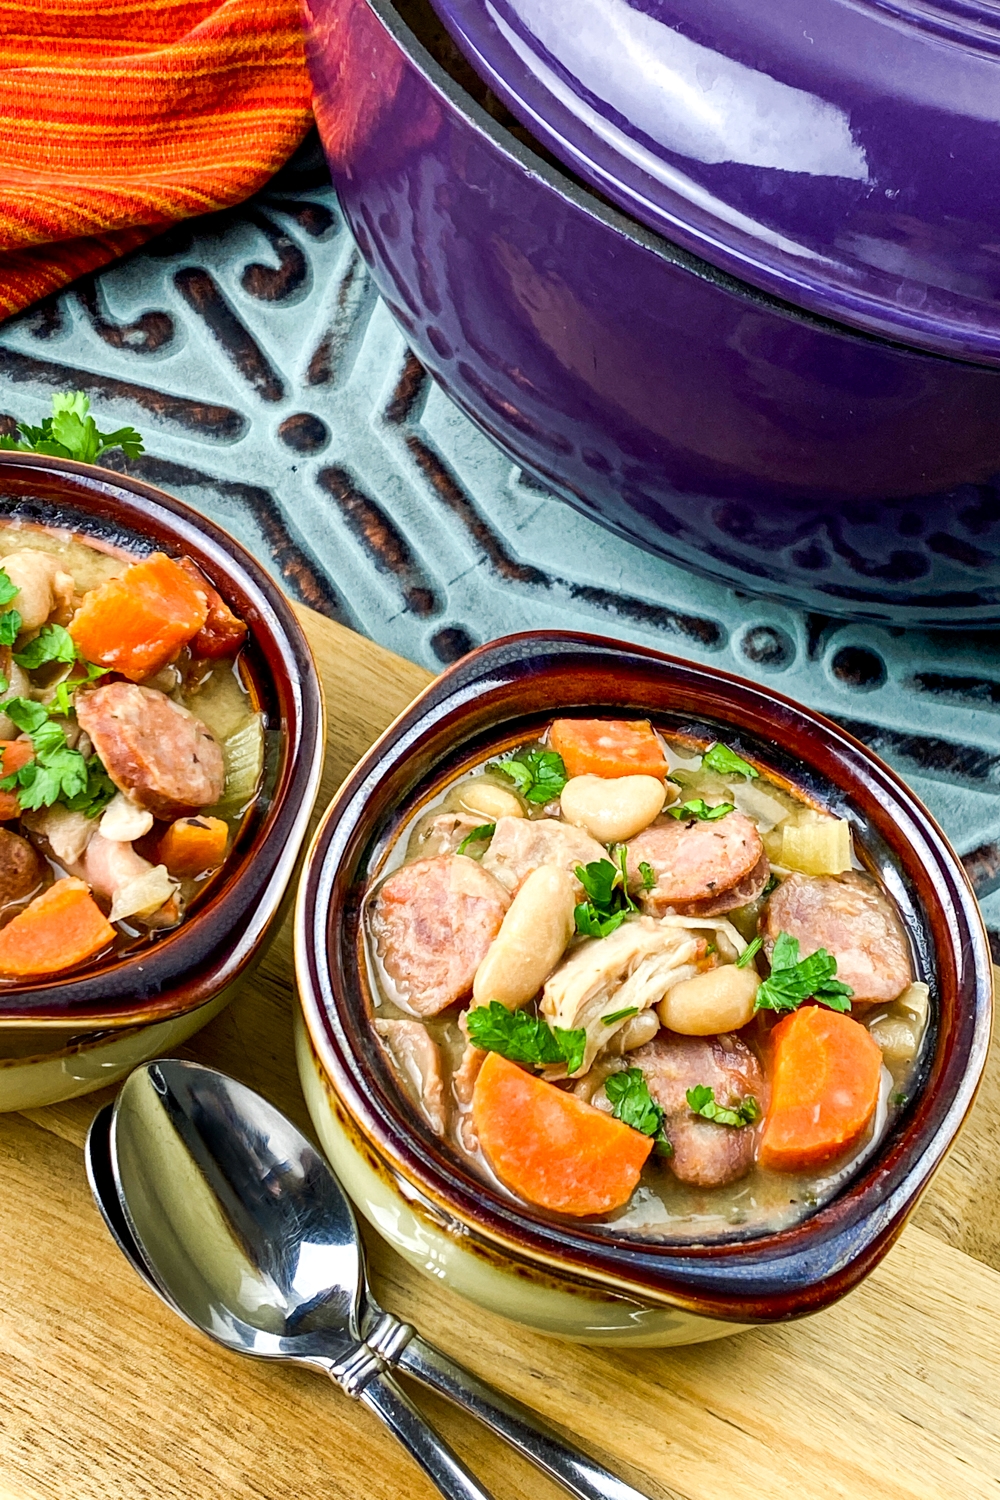 Make this hearty chicken and white bean stew that's perfect for a cold evening. It's a recipe for a nourishing, satisfying weekday meal.